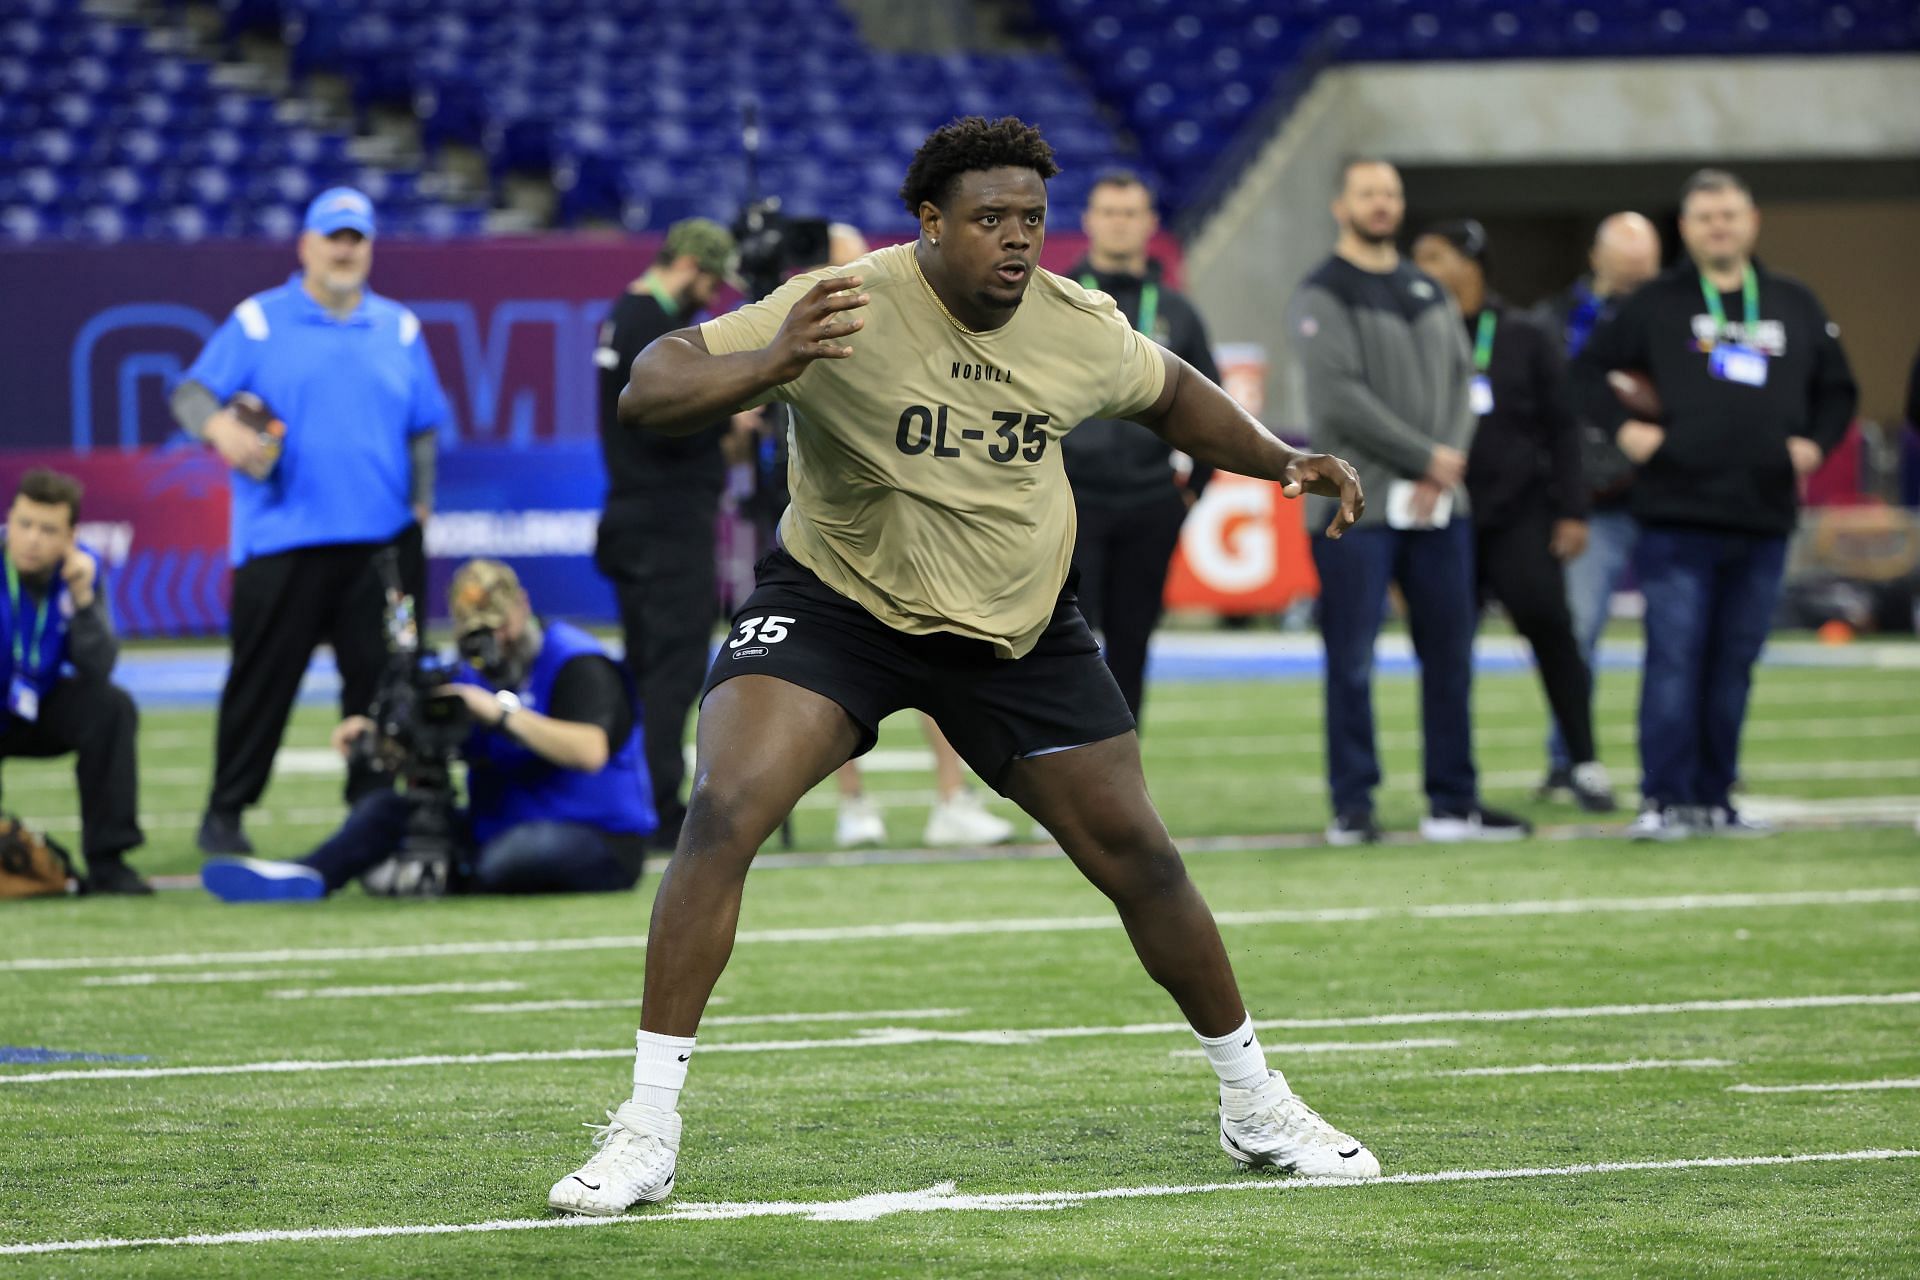 Christian Jones #OL35 of Texas participates in a drill during the NFL Combine